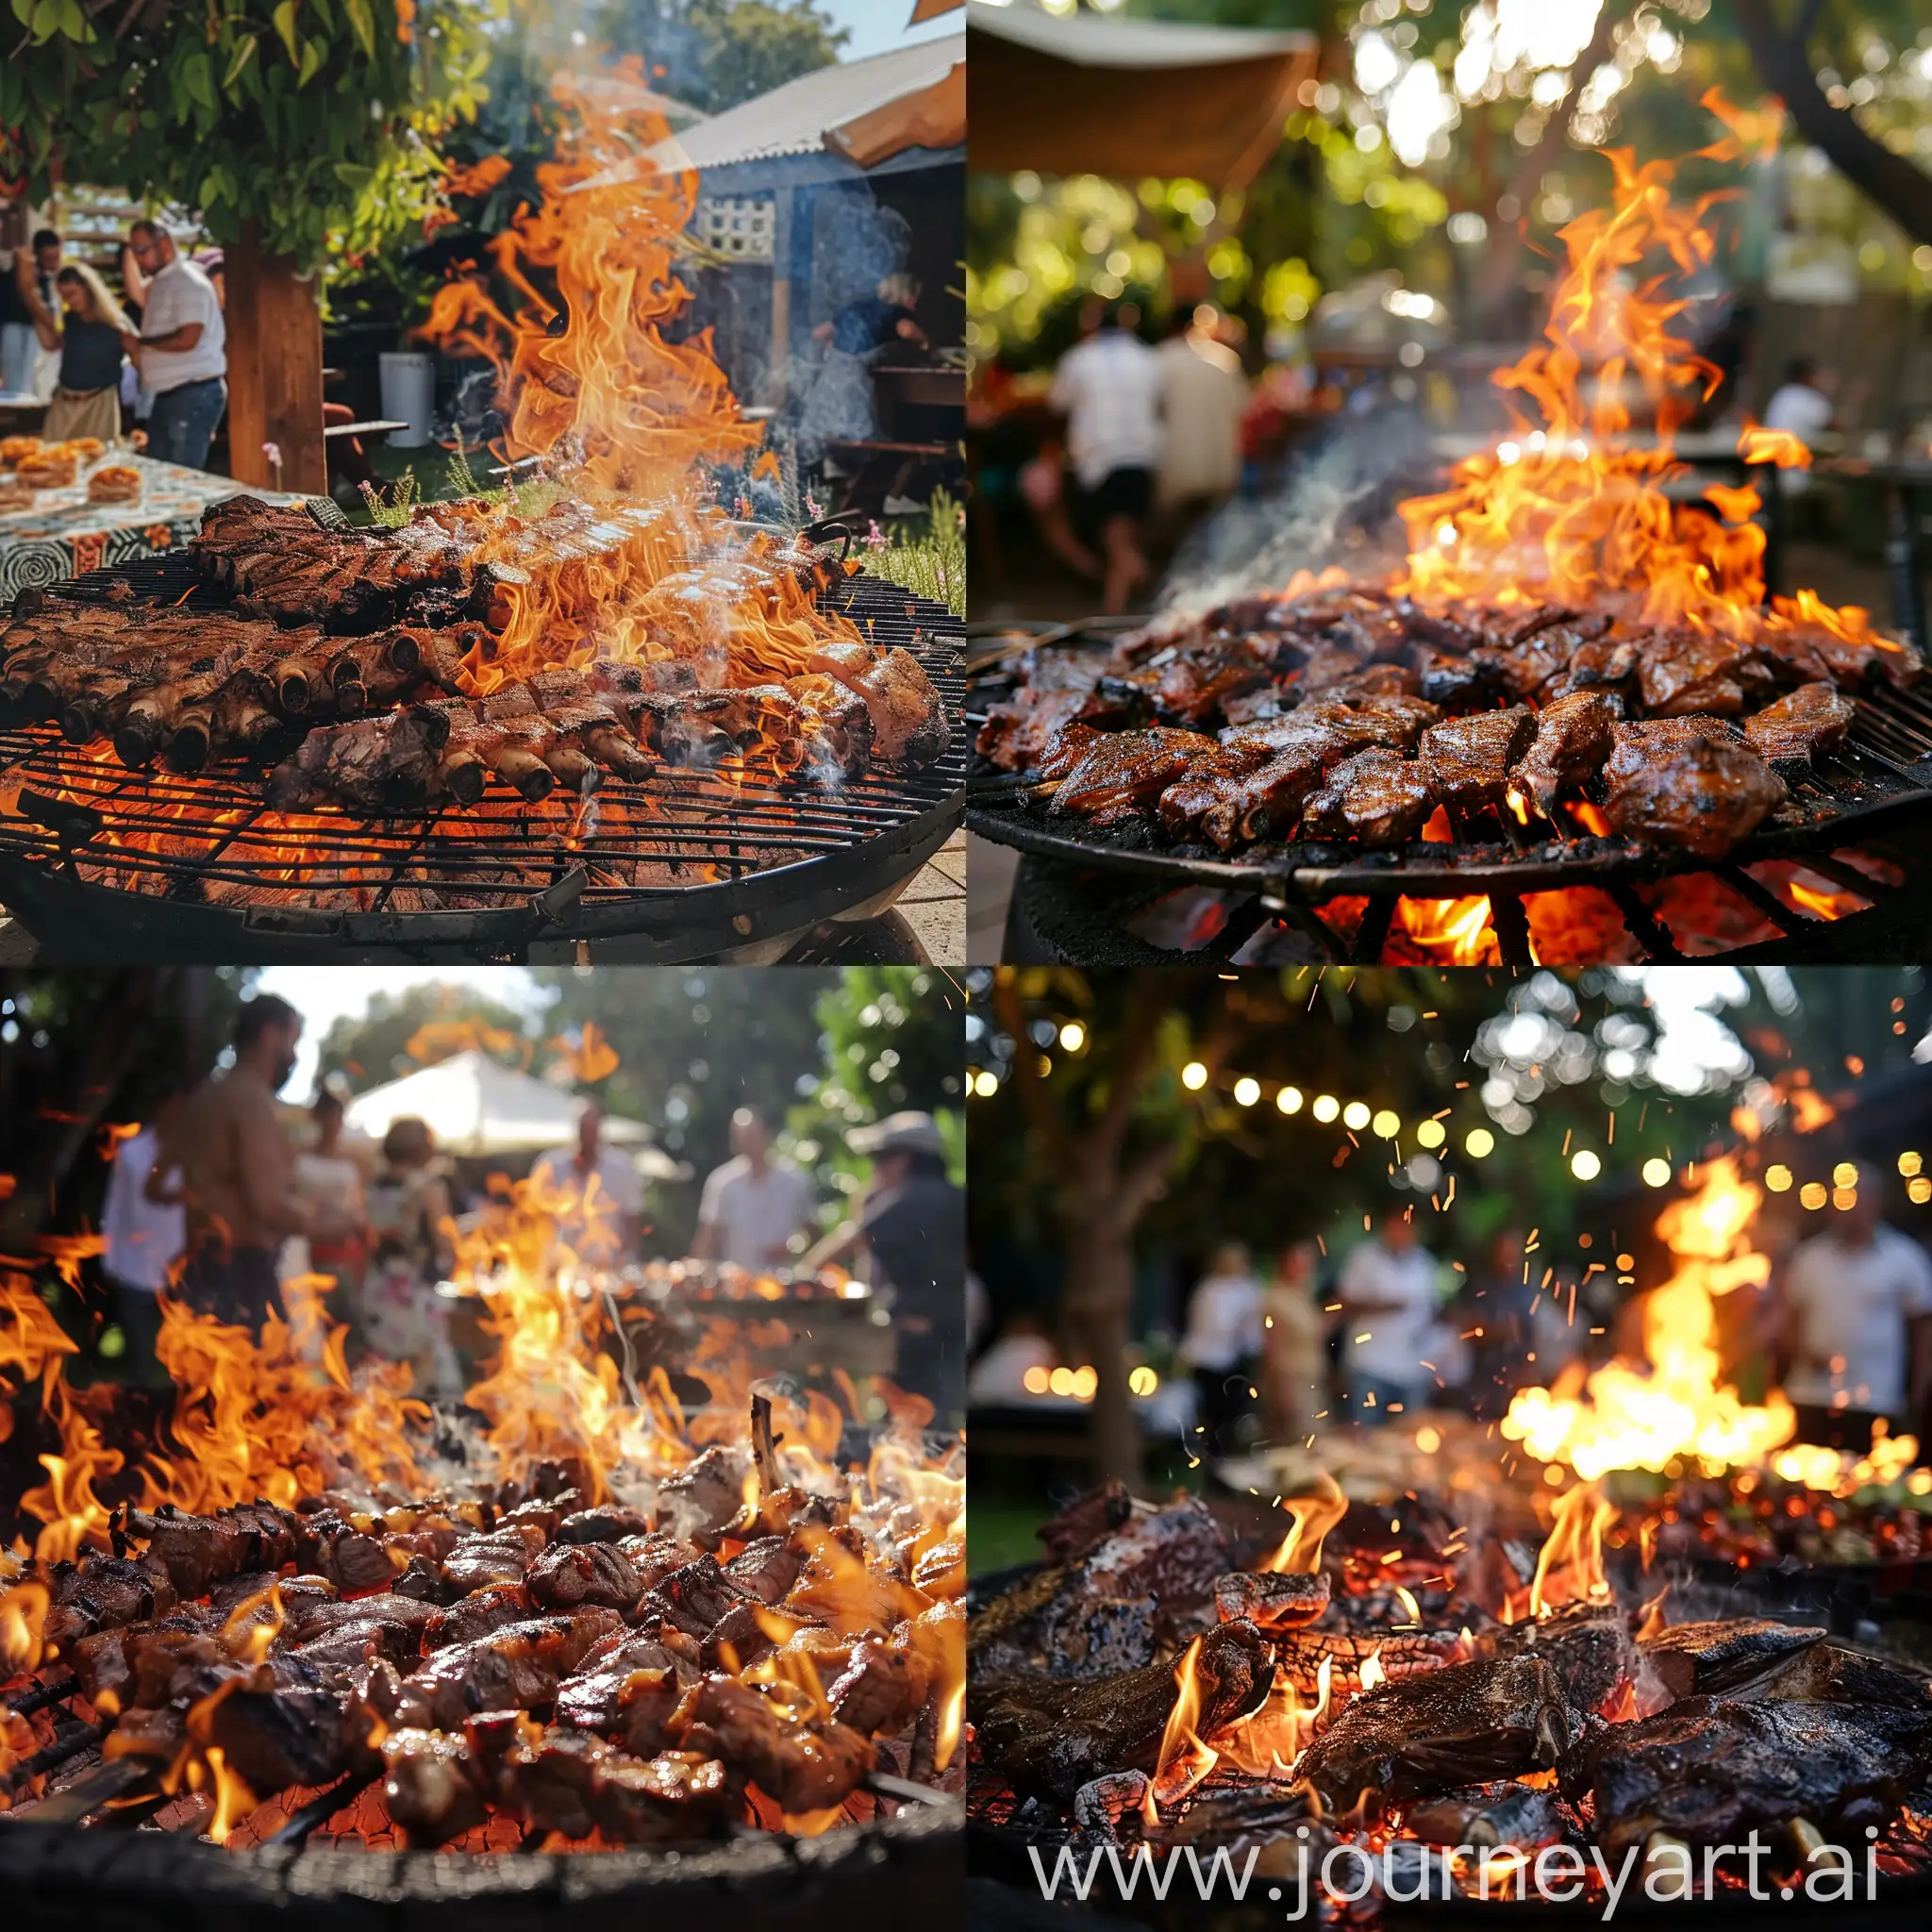 Vibrant-South-African-Braai-Barbecue-Party-with-Large-Fire-and-Crowd